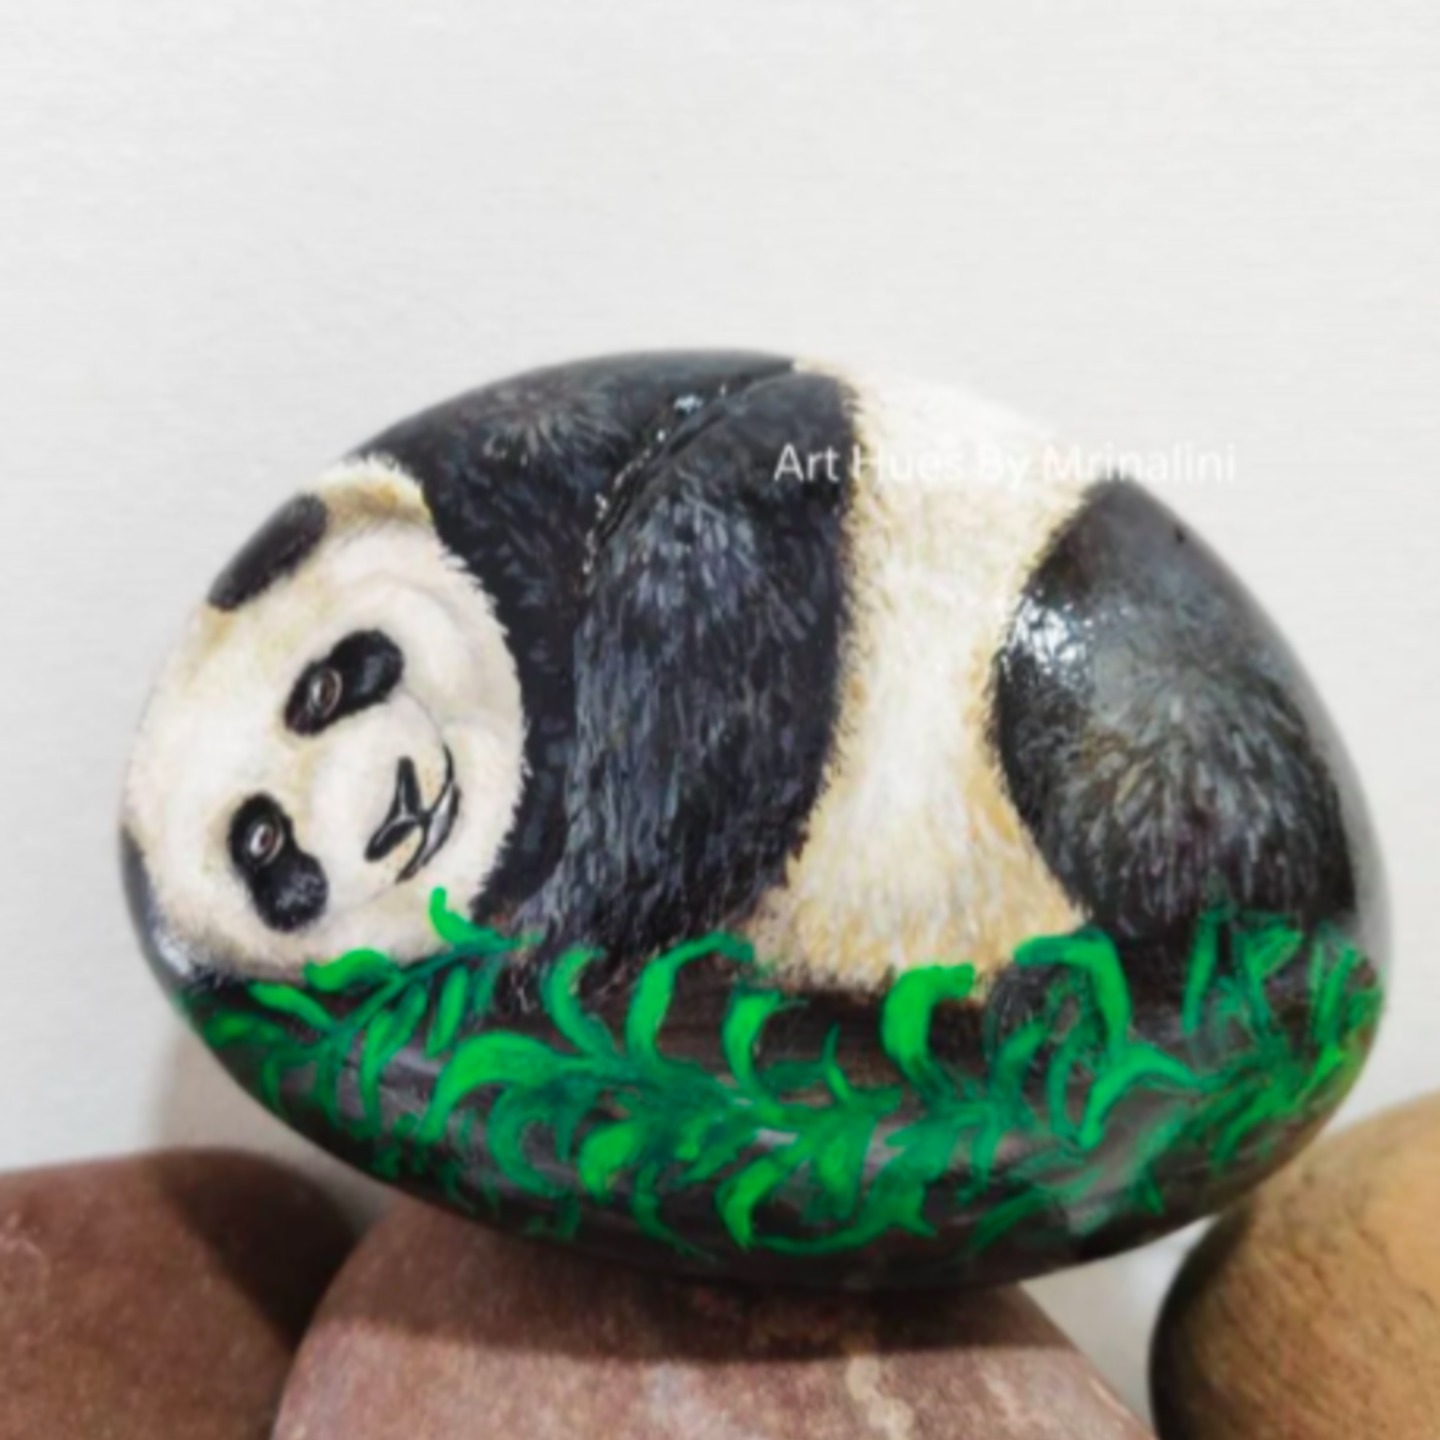 Original Baby Panda playing on a rock hand painted on a rock stone art